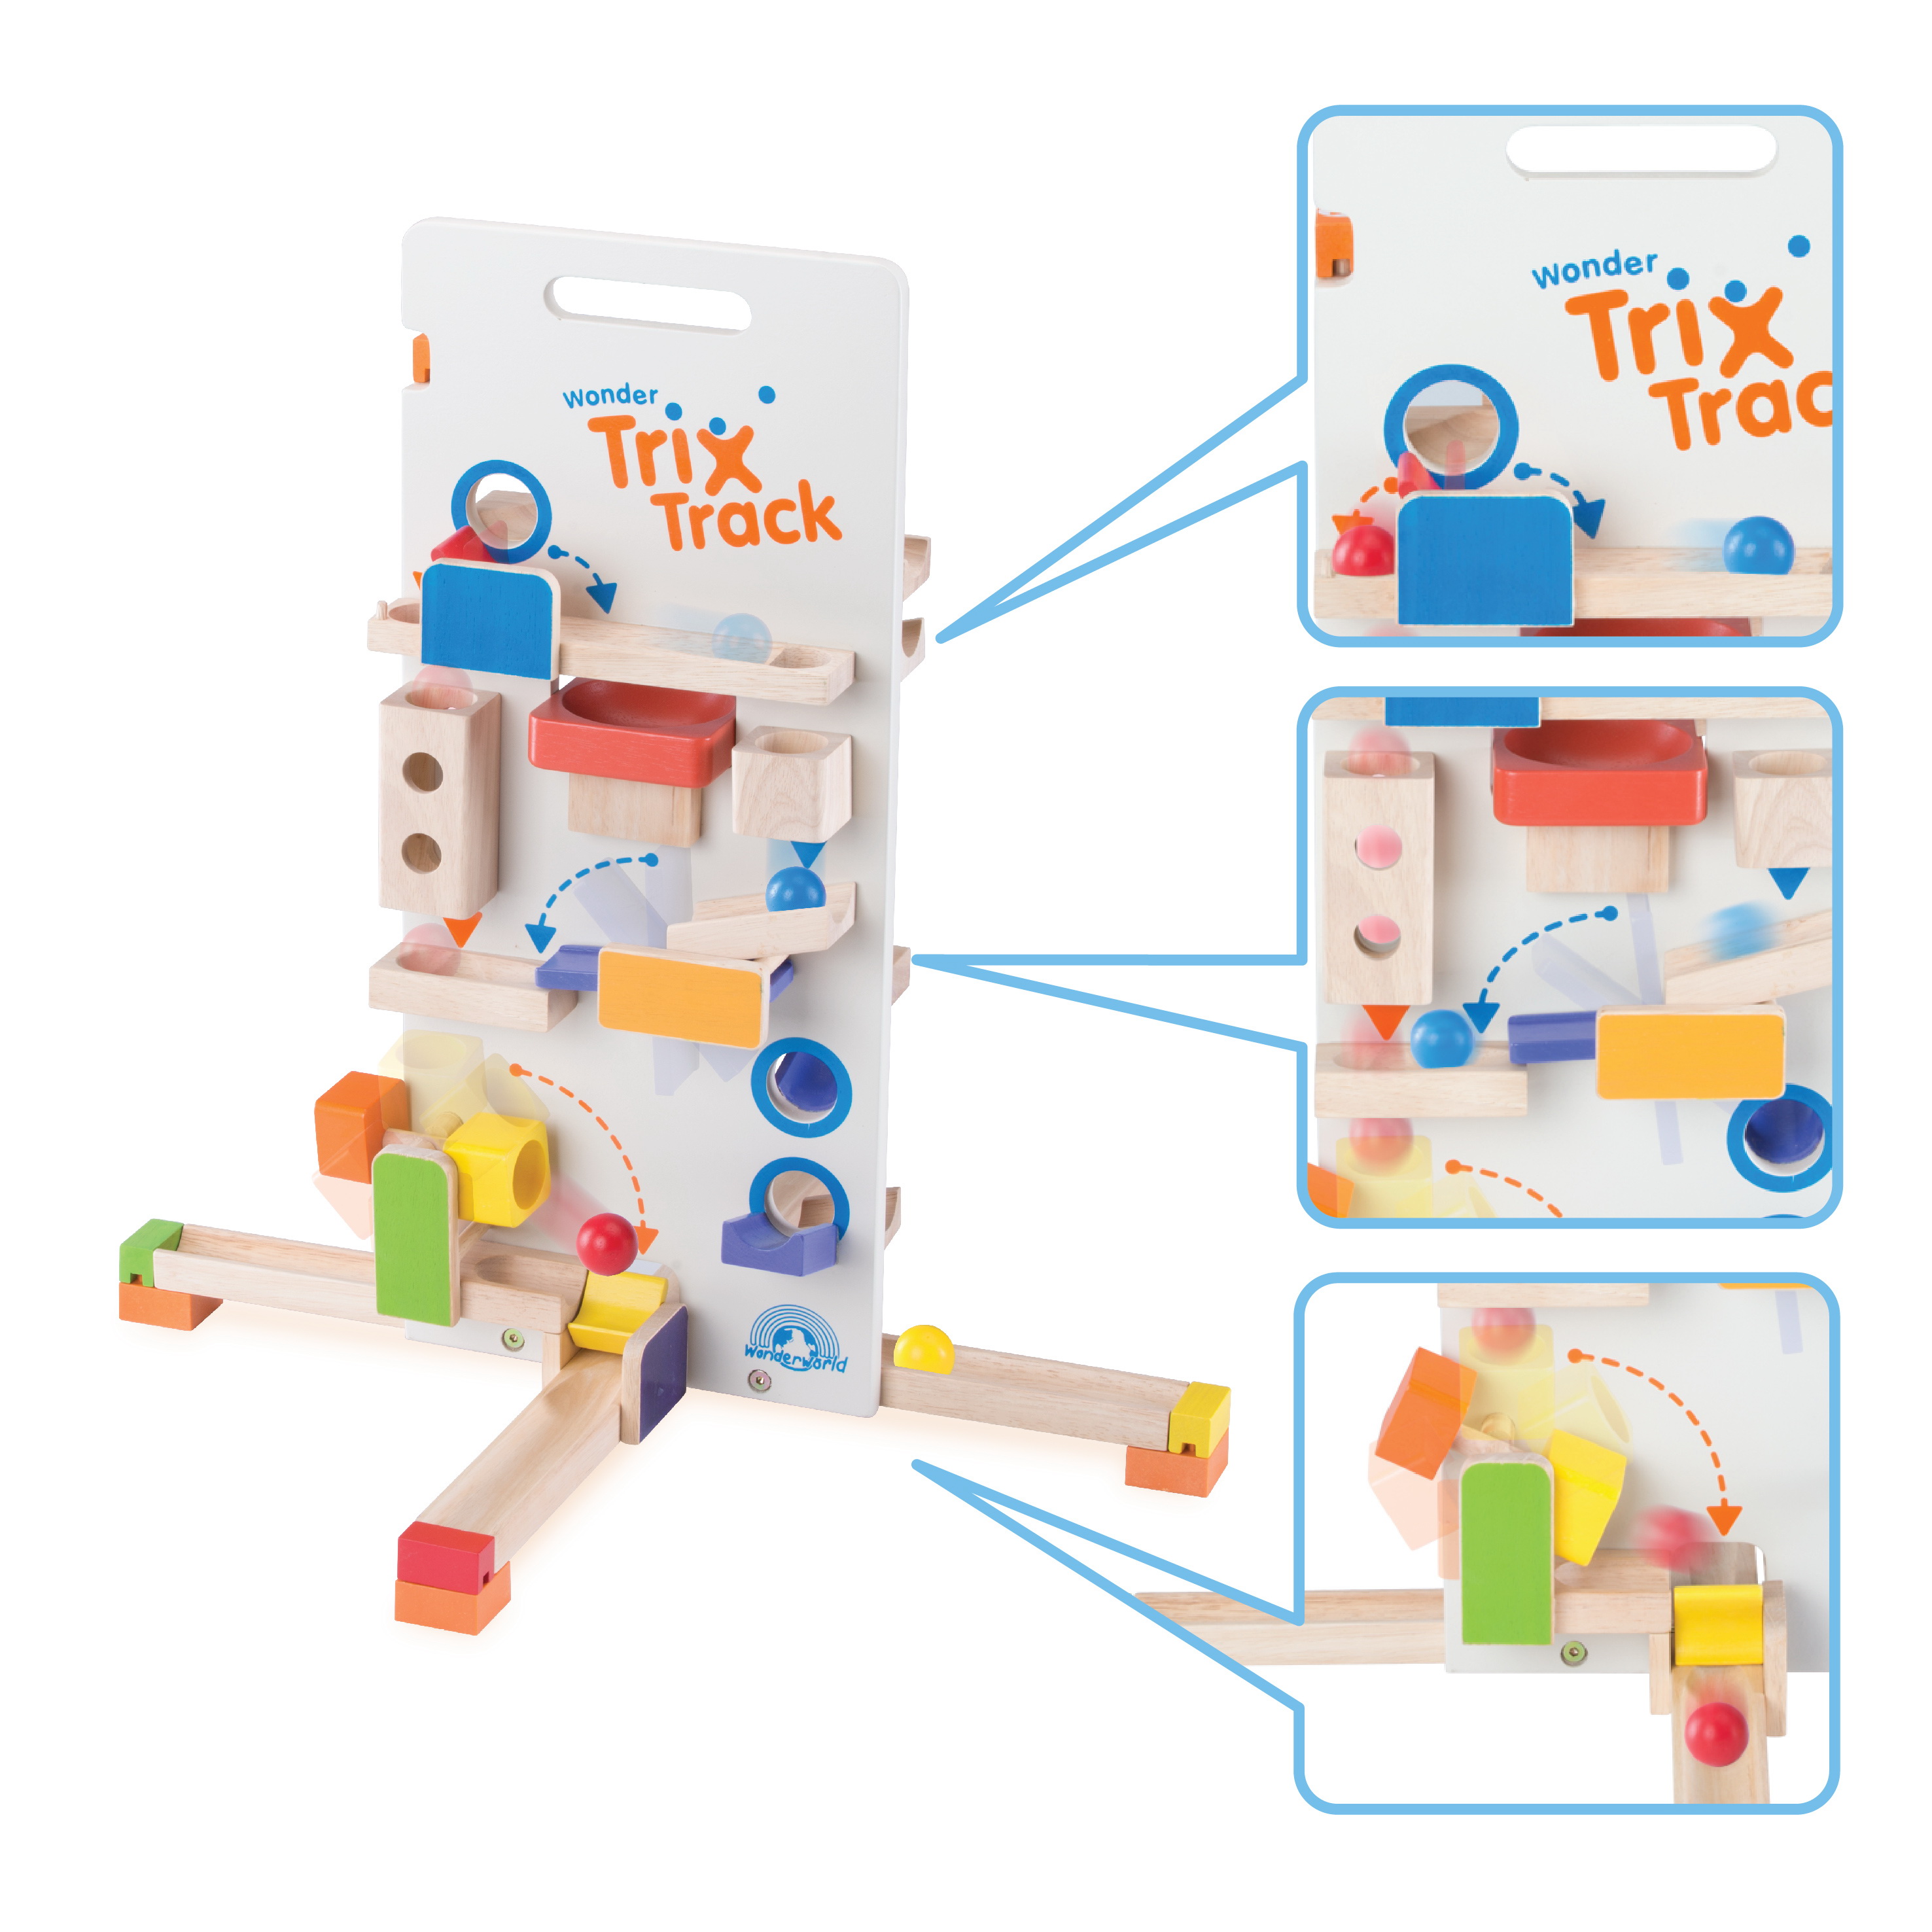 WW-7010 TOWER LAUNCHER | Wonderworldtoy - Natural toys for smart play